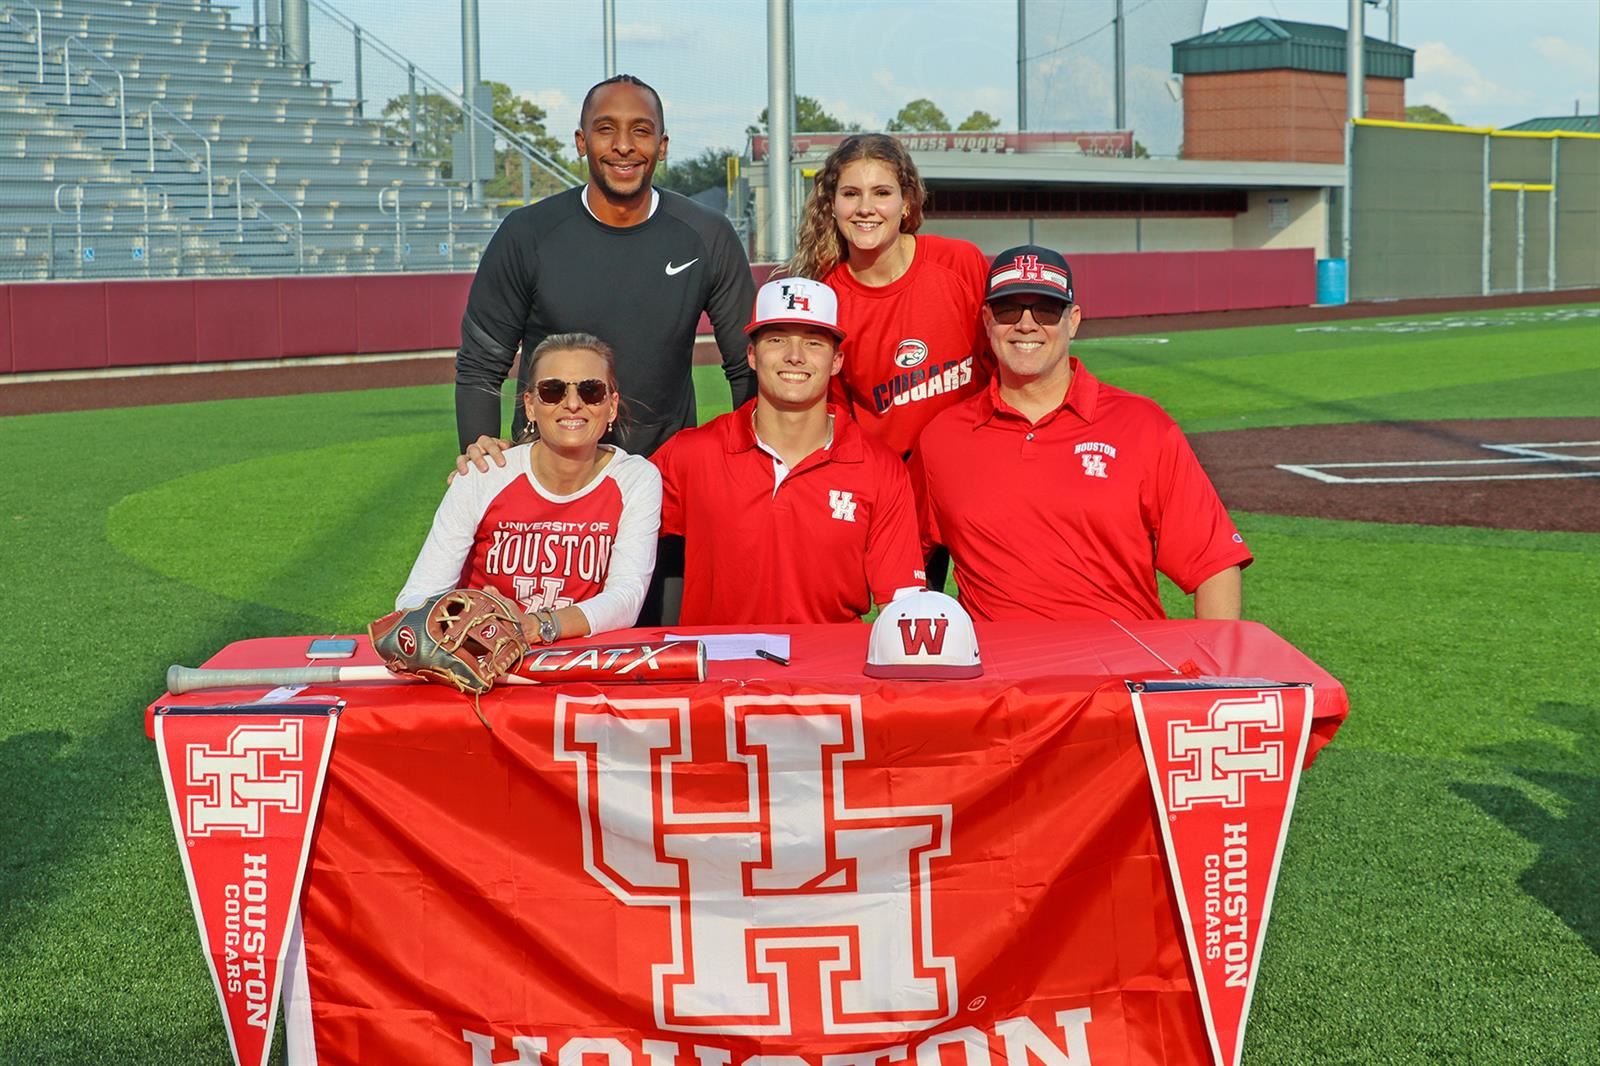 Cypress Woods senior Tristin Russell, seated center, signed a letter of intent to play baseball at the University of Houston.